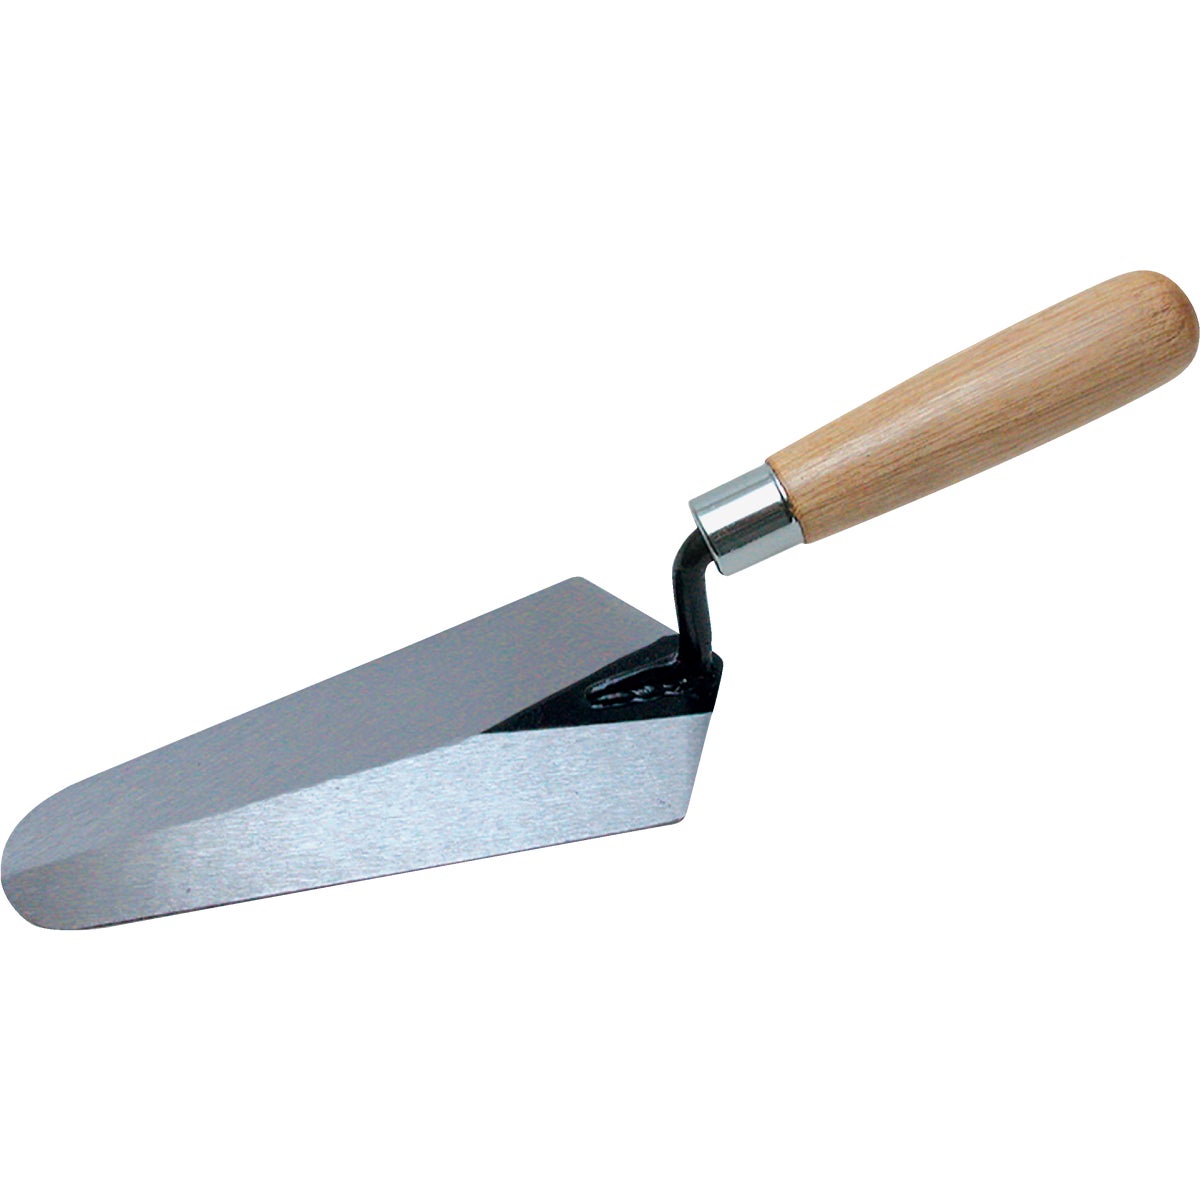 Item 370762, Model No. 924-3. 7" x 3-3/8" tempered blade; fully ground and polished.